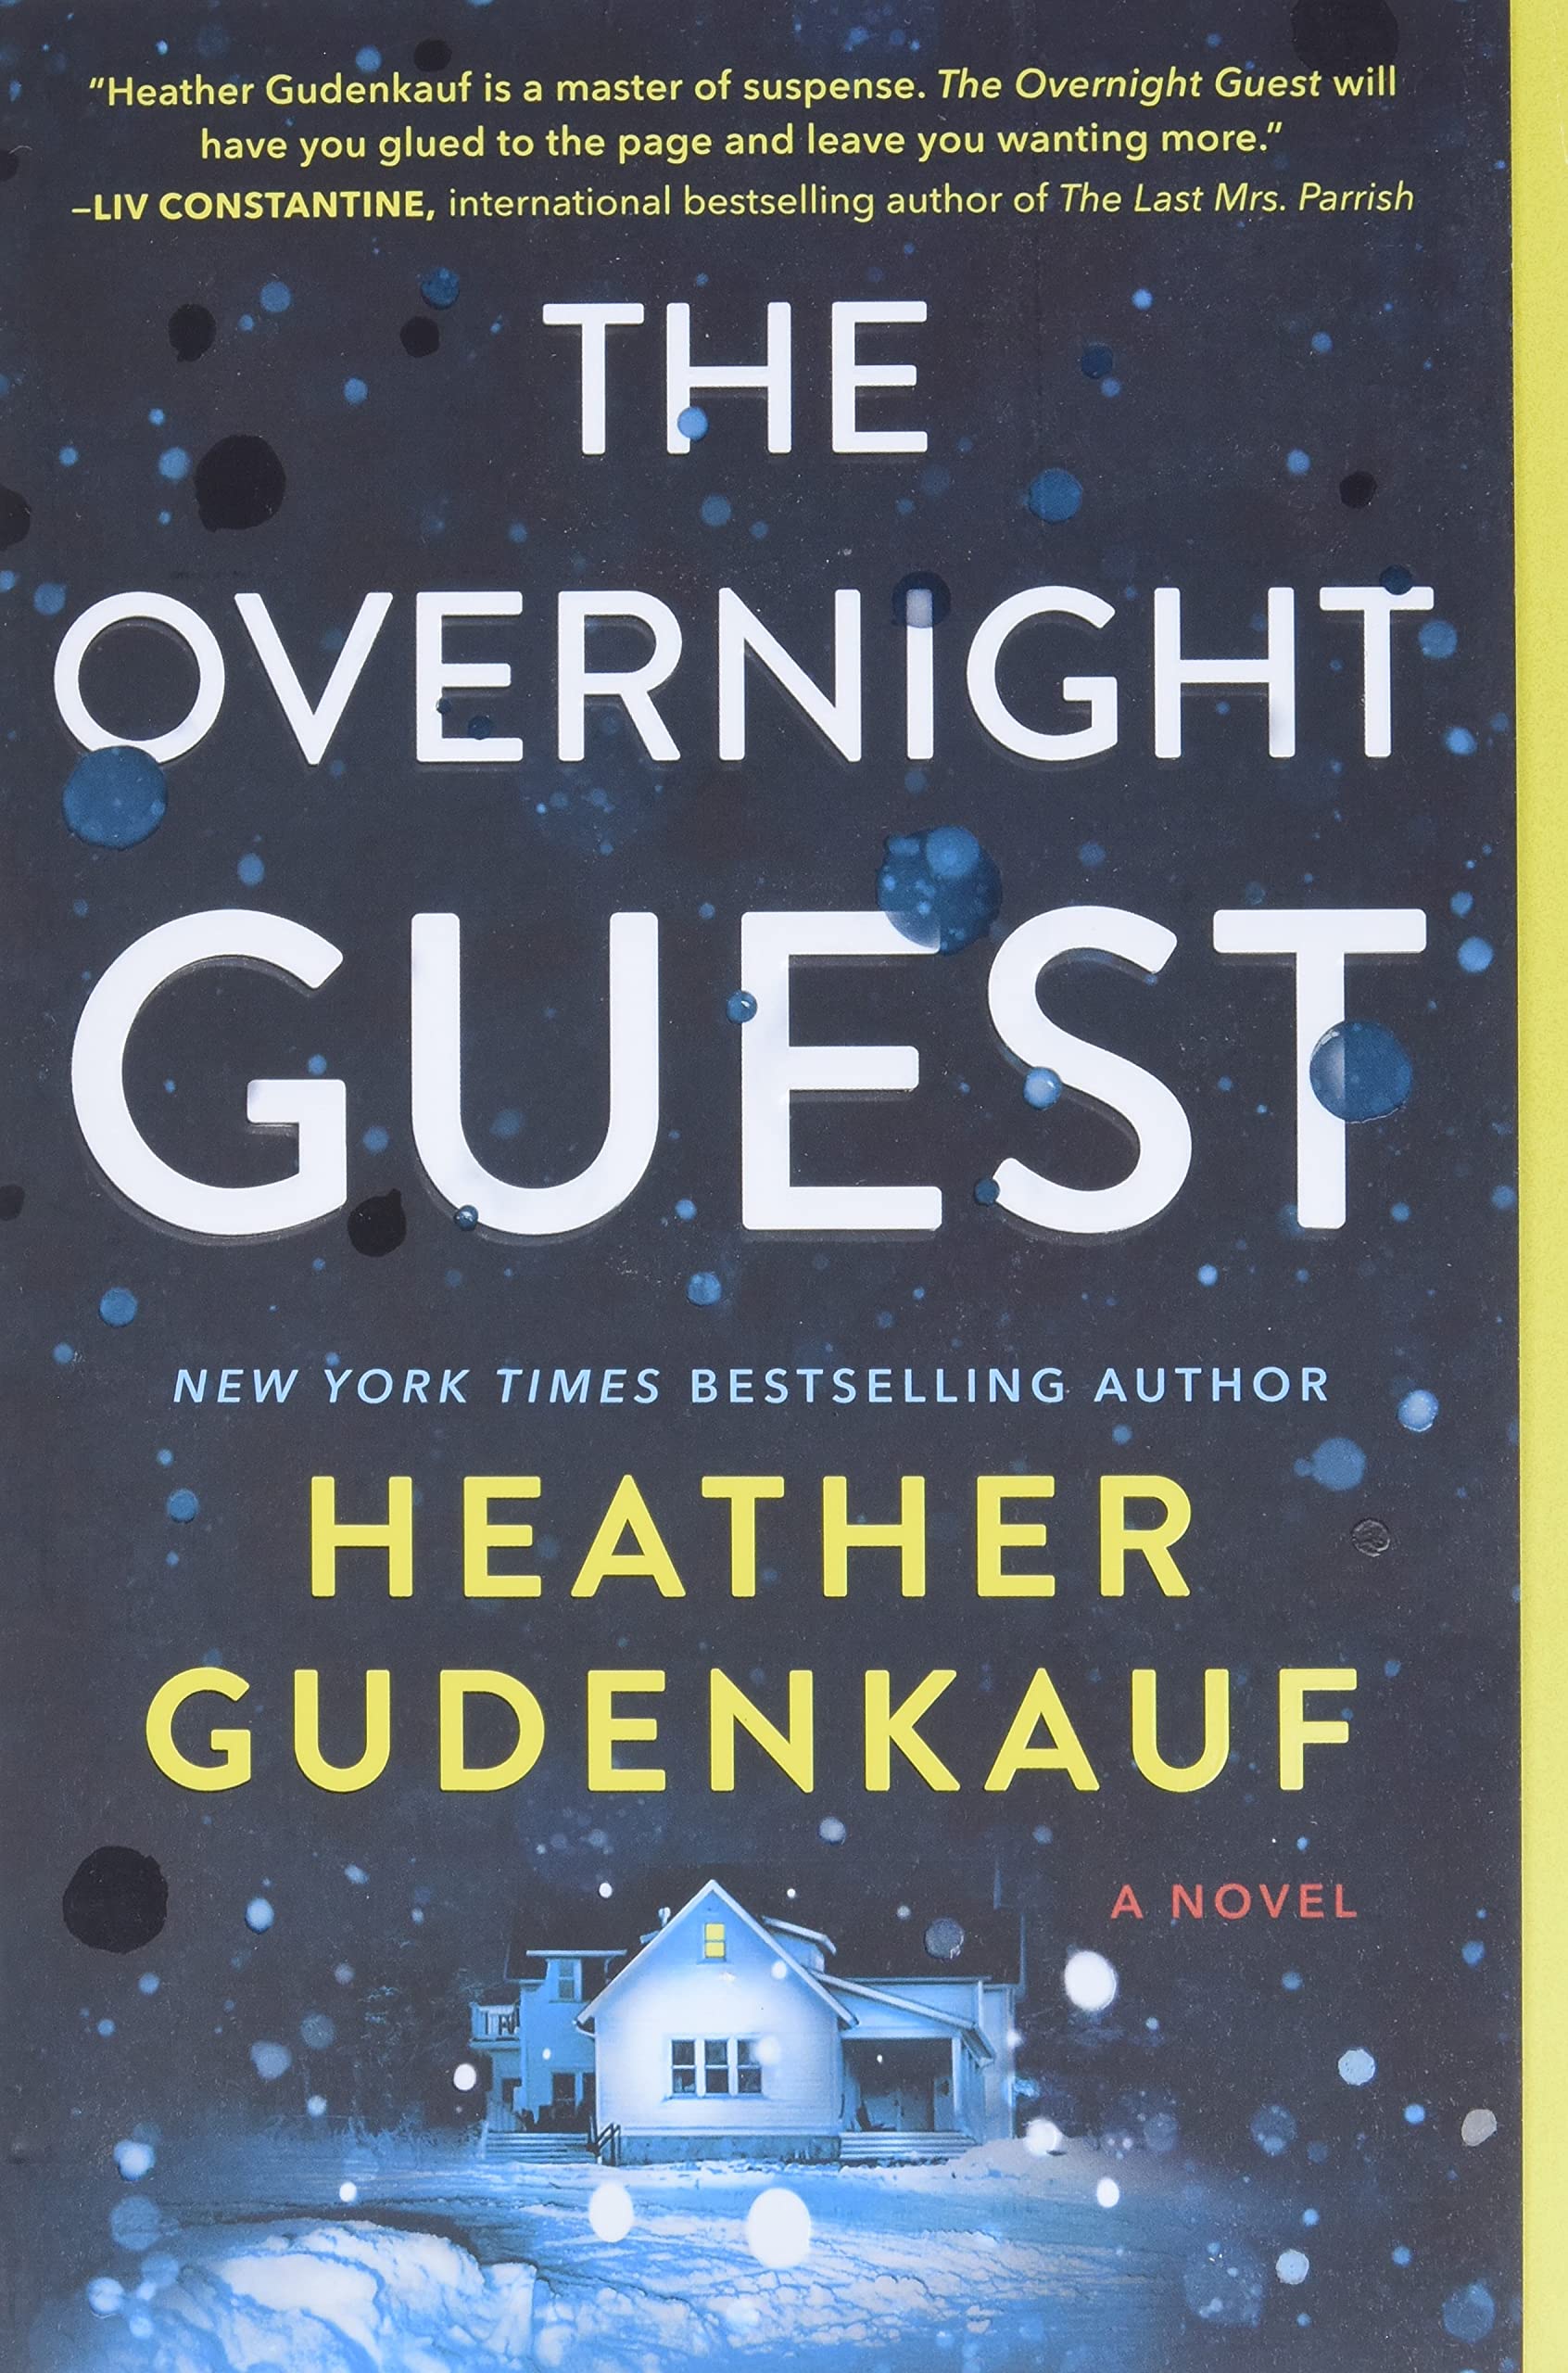 A black cover with the title The Overnight Guest at the top, then Heather Gudenkauf in yellow. At the bottom is a snowy image of a house